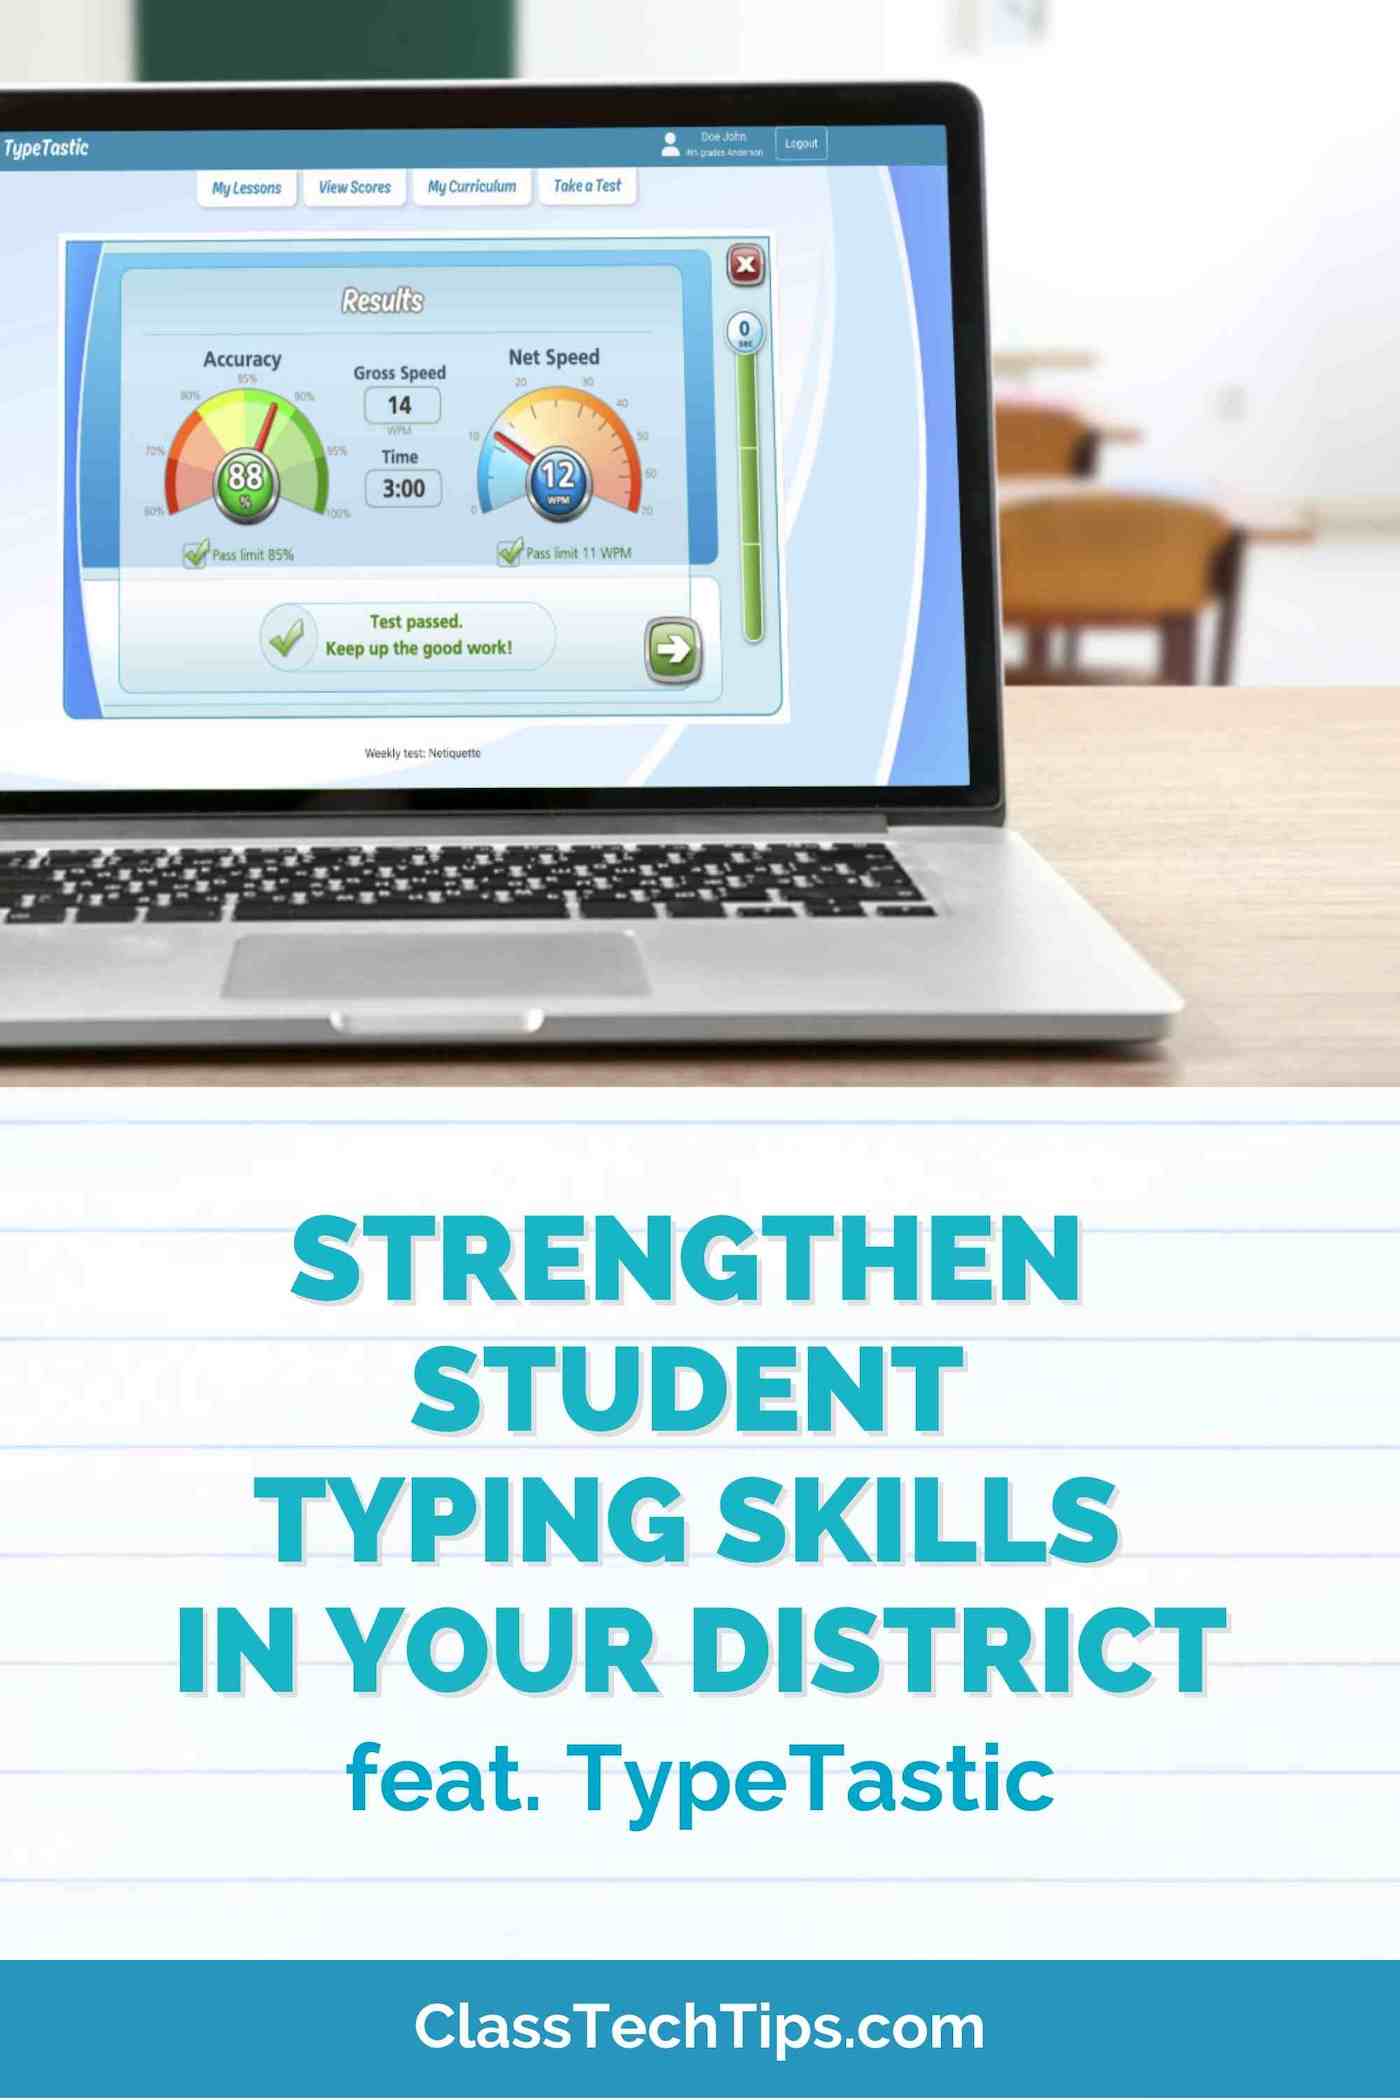 Strengthen-Student-Typing-Skills-in-Your-District-